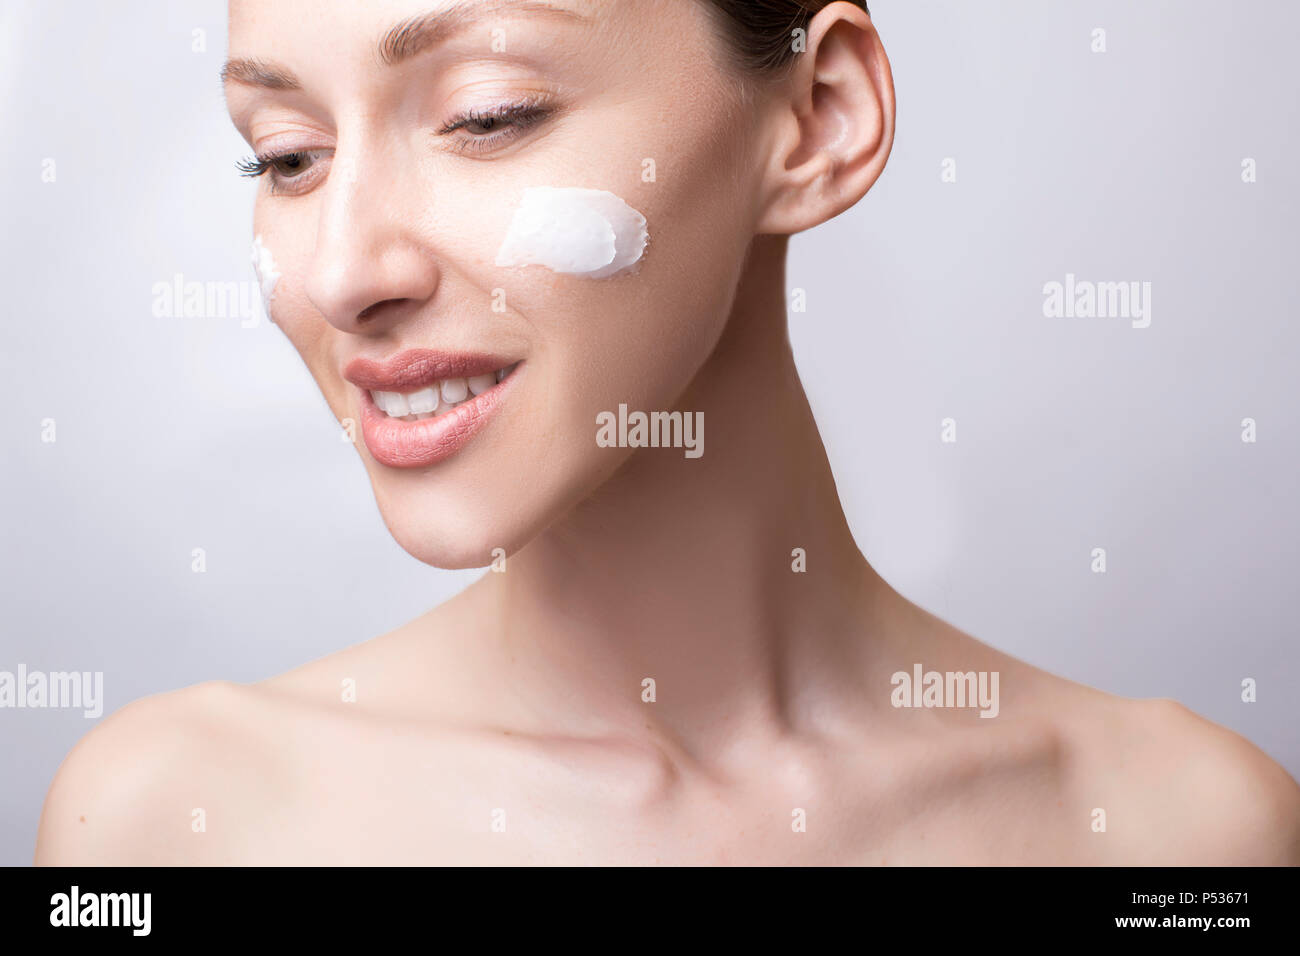 Laughing girl applying moisturizing cream on her face. Photo of young girl with flawless skin on grey background. Skin care and beauty concept Stock Photo